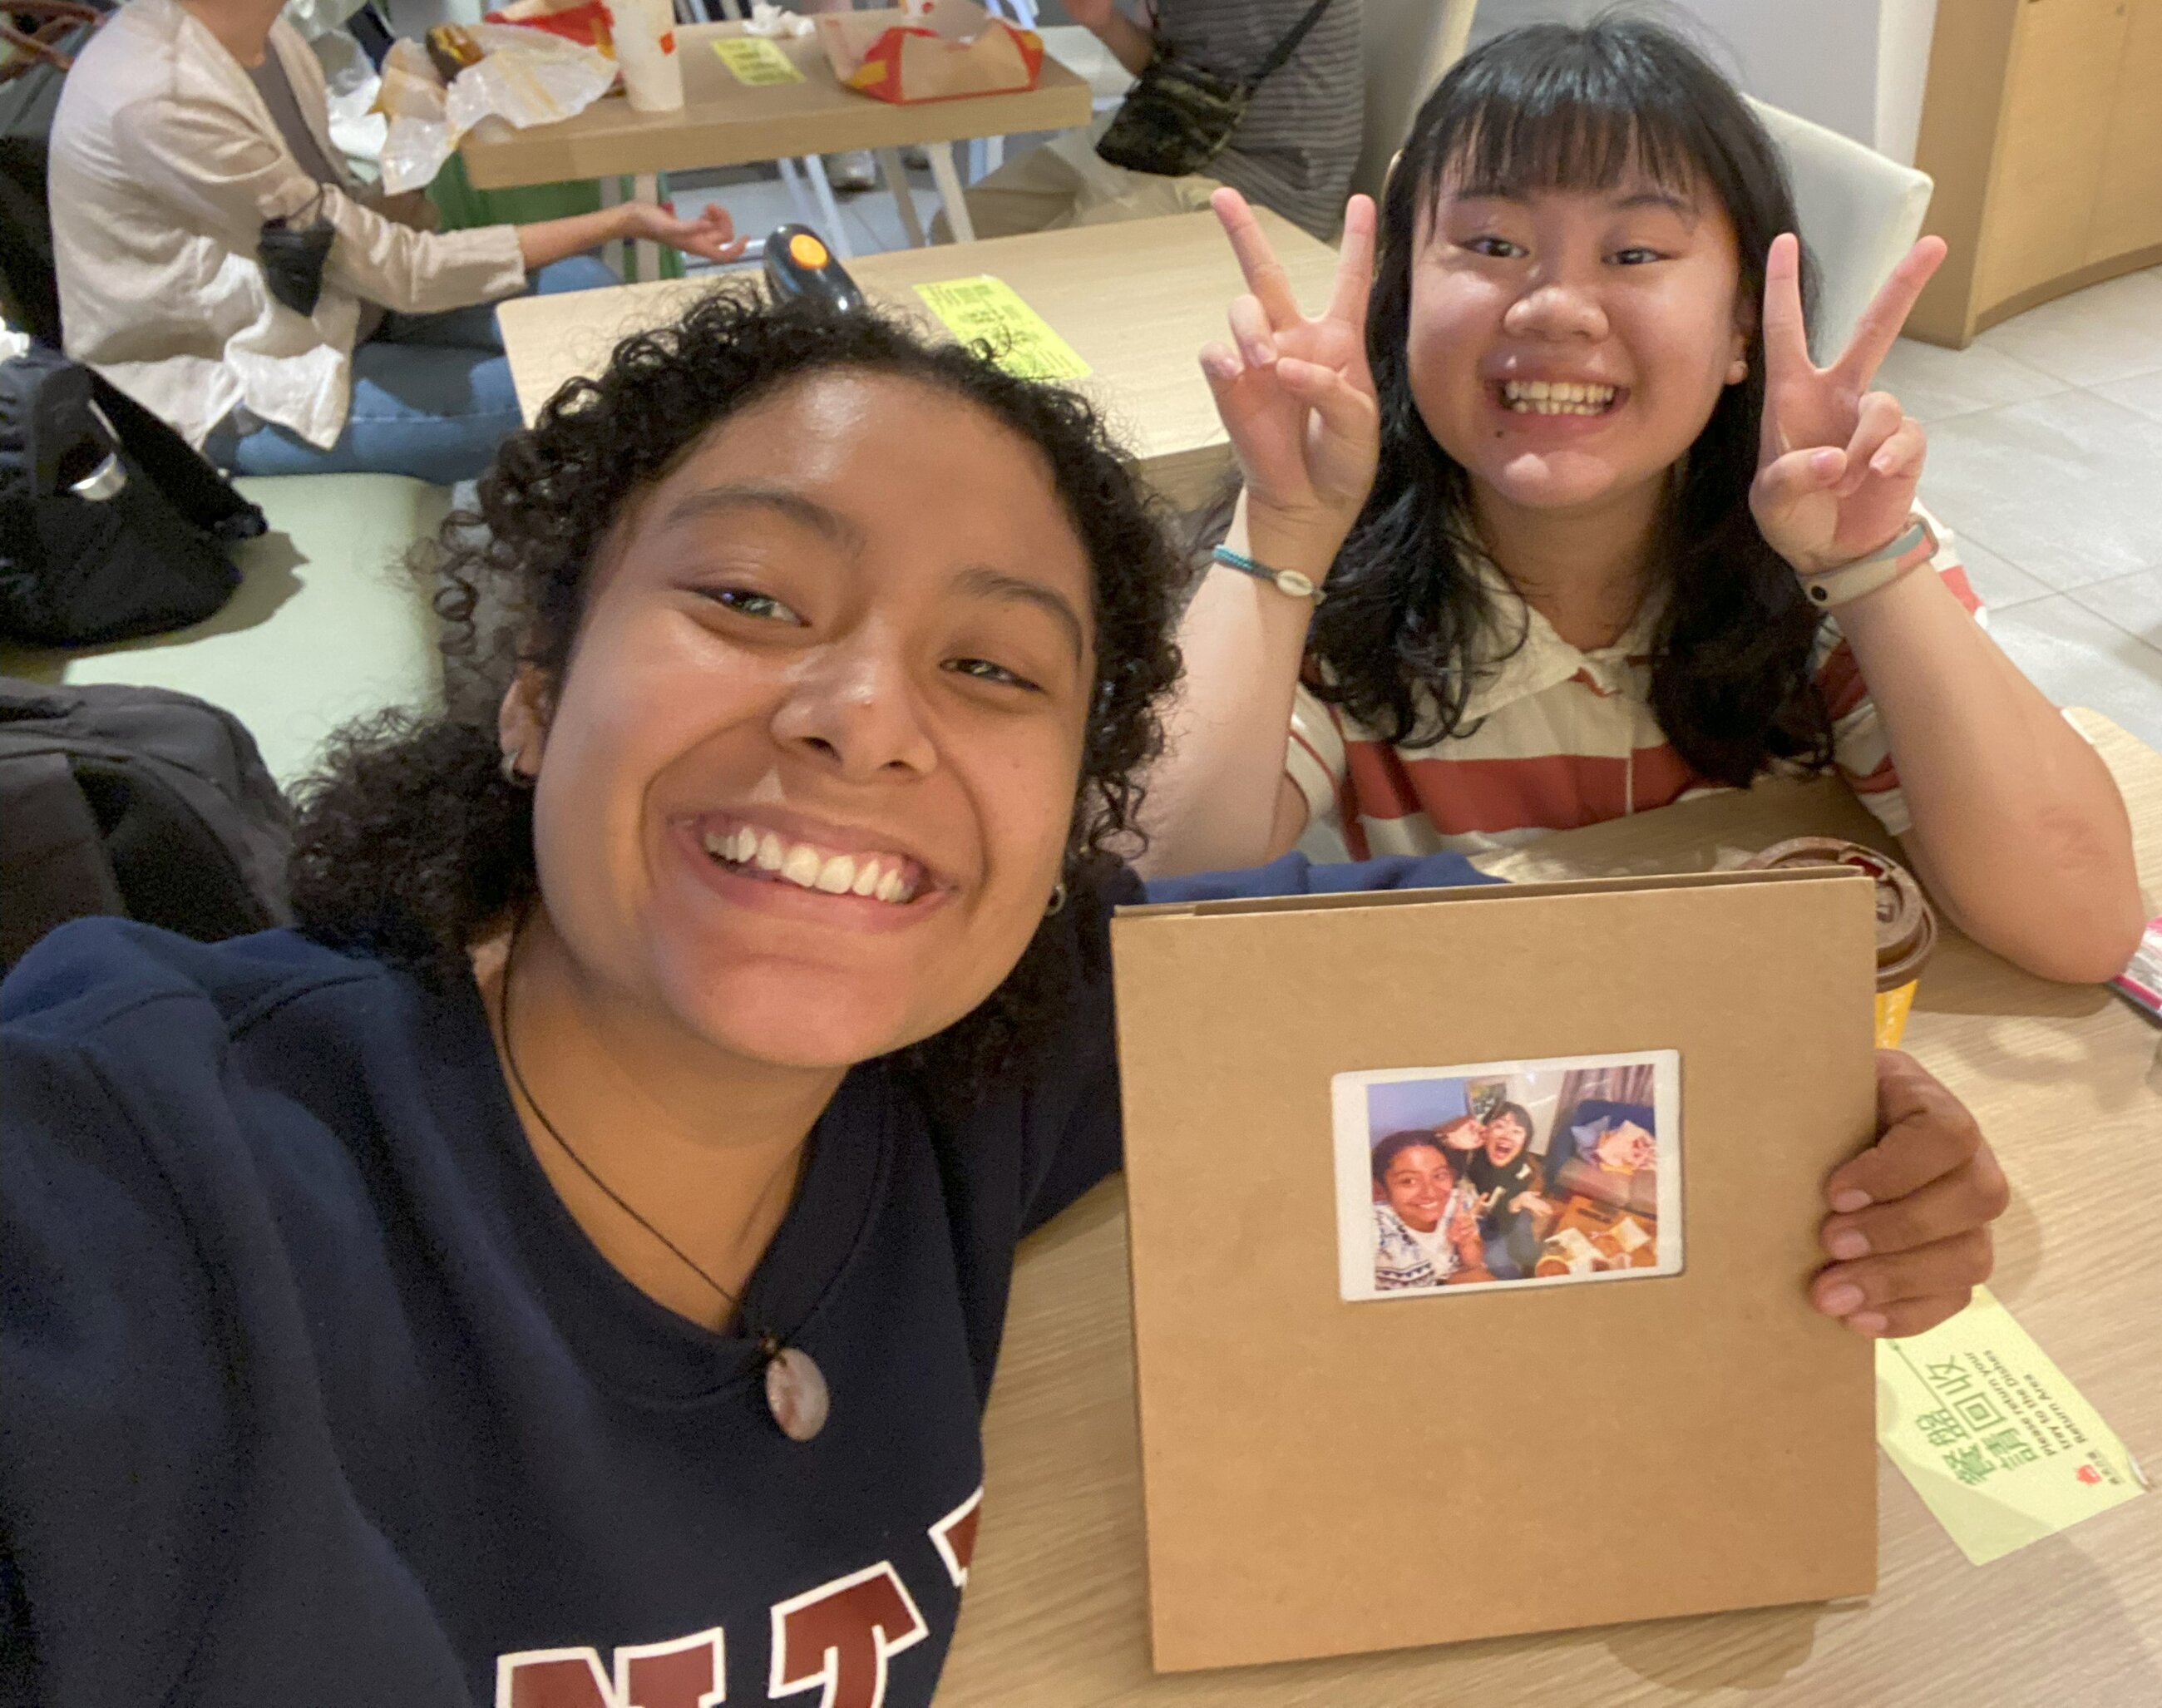 She is Lynn! She can speak Spanish! 太厲害了的朋友！On my Departure date, she came with me to the airport and surprised me with a beautiful memory book! Lynn is so Sweet!